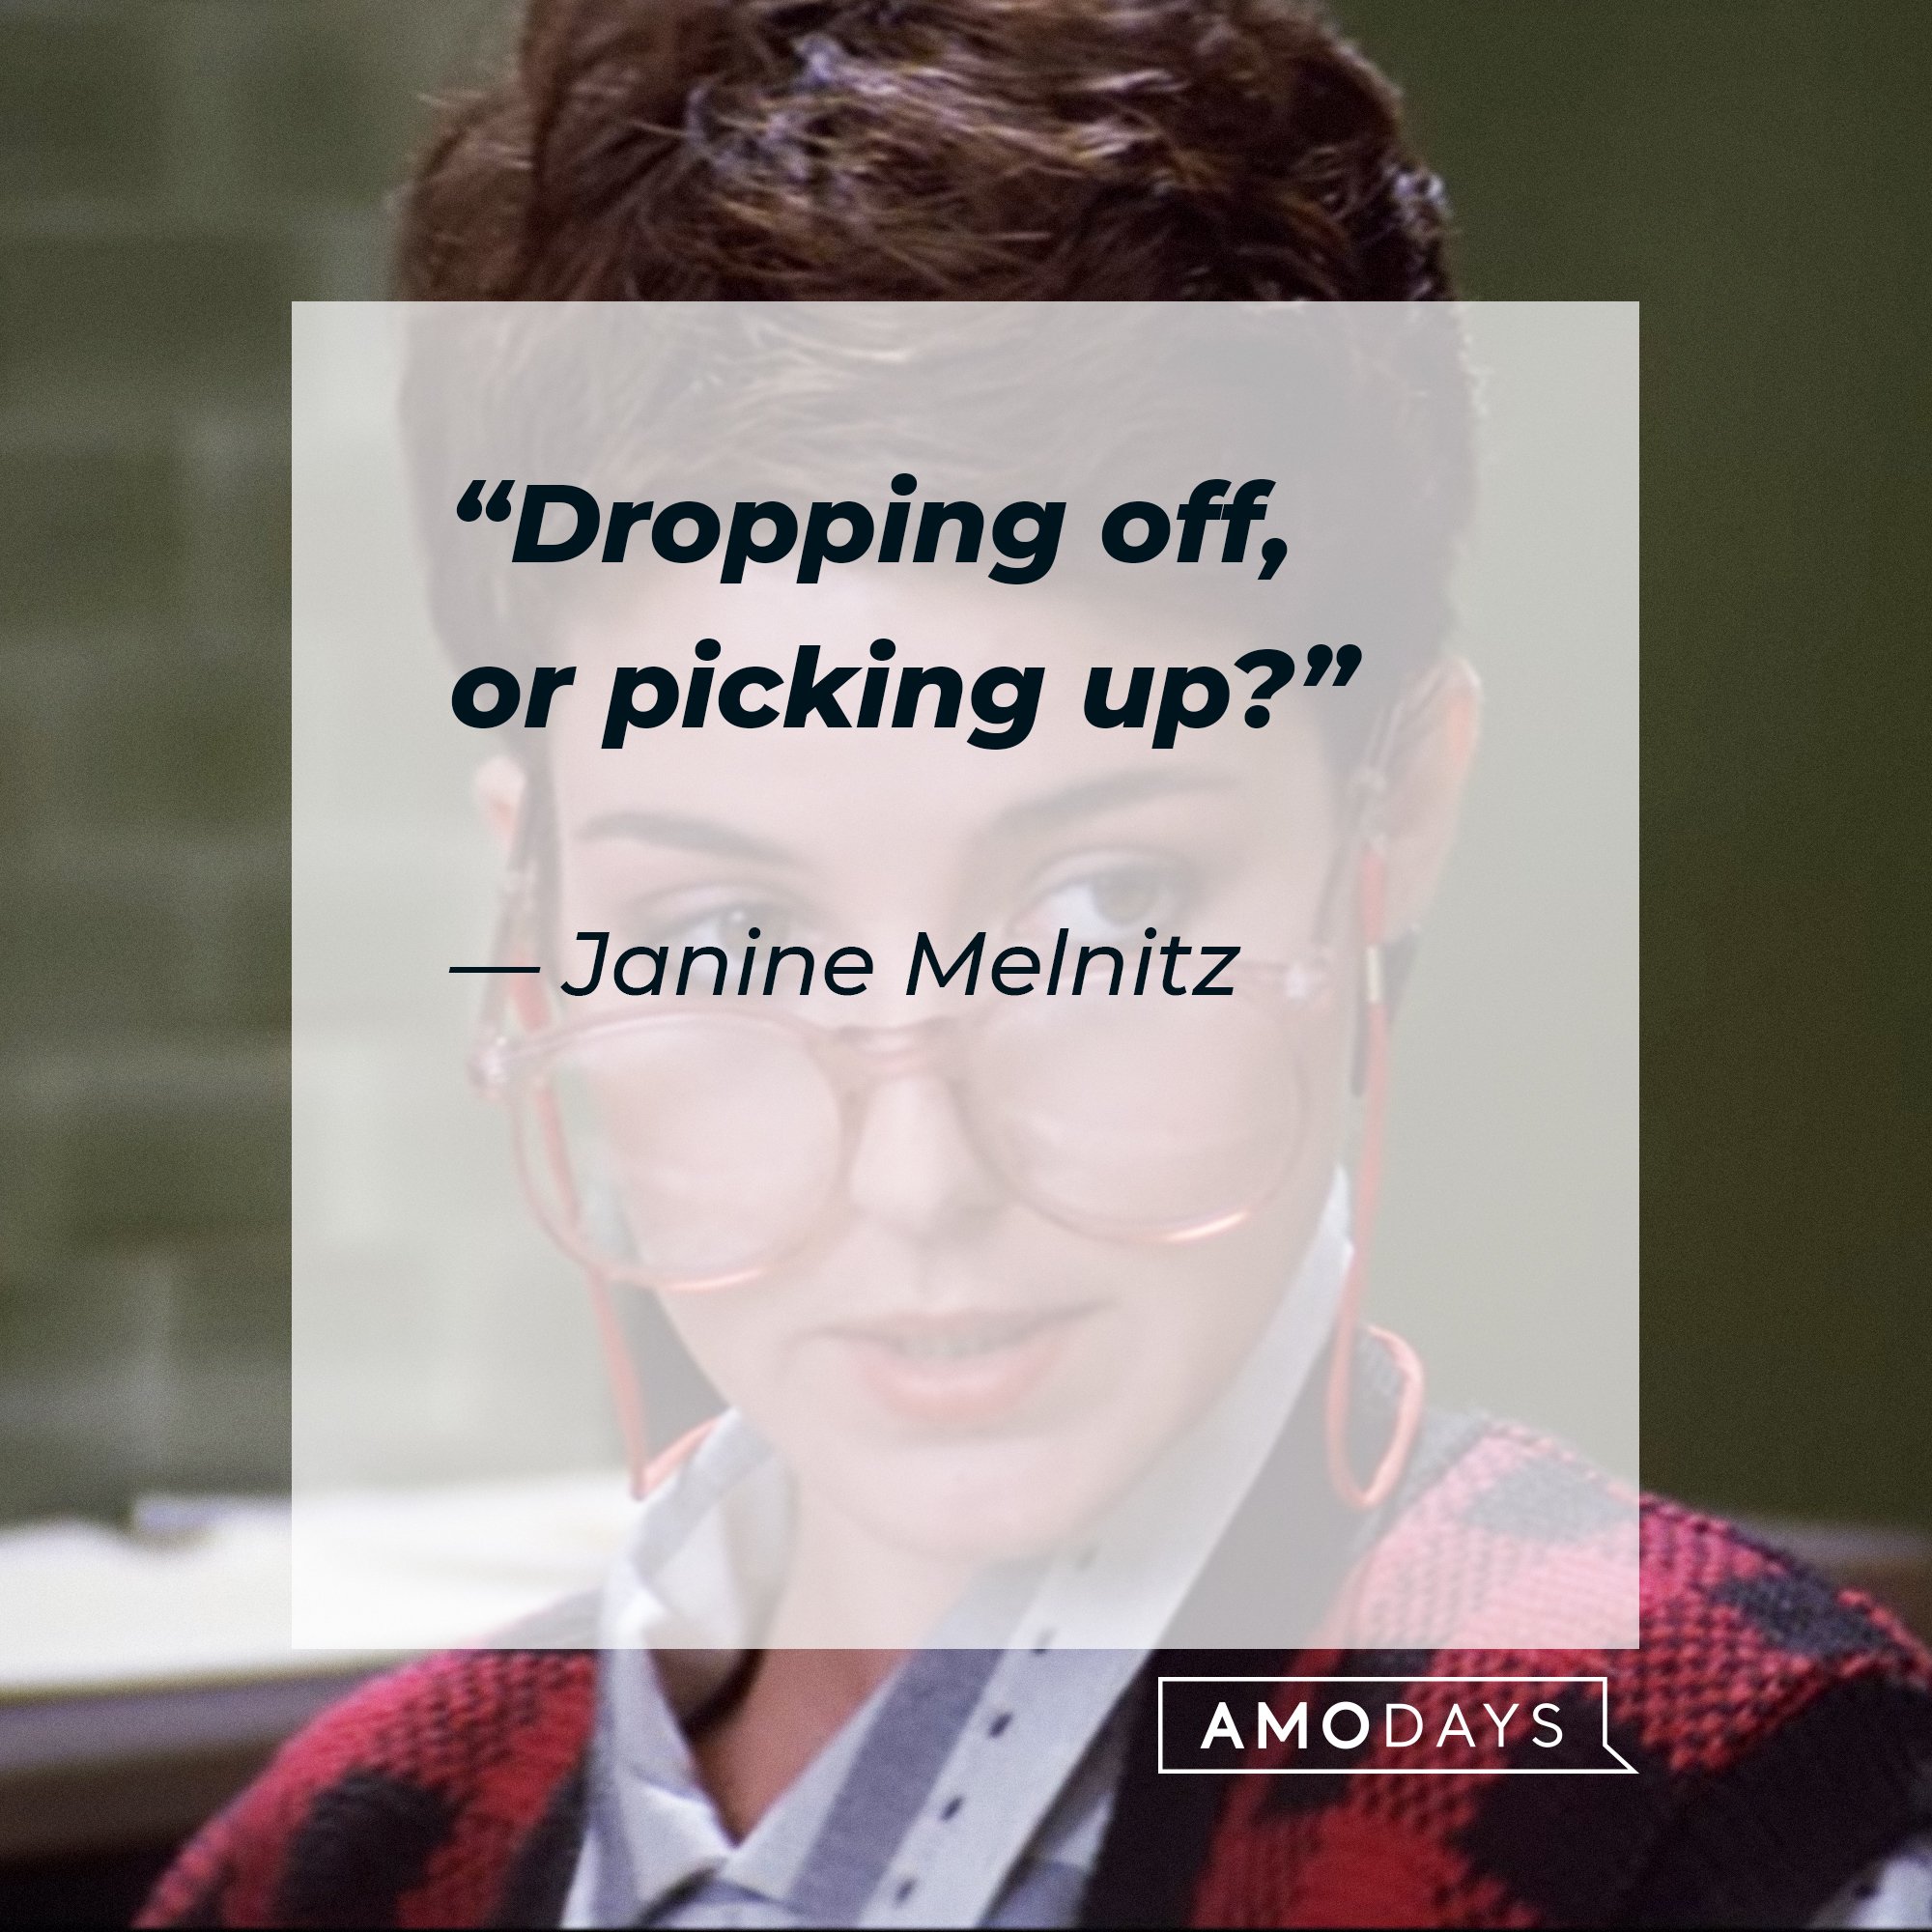 Janine Melnitz's quote: “Dropping off, or picking up?” | Image: AmoDays